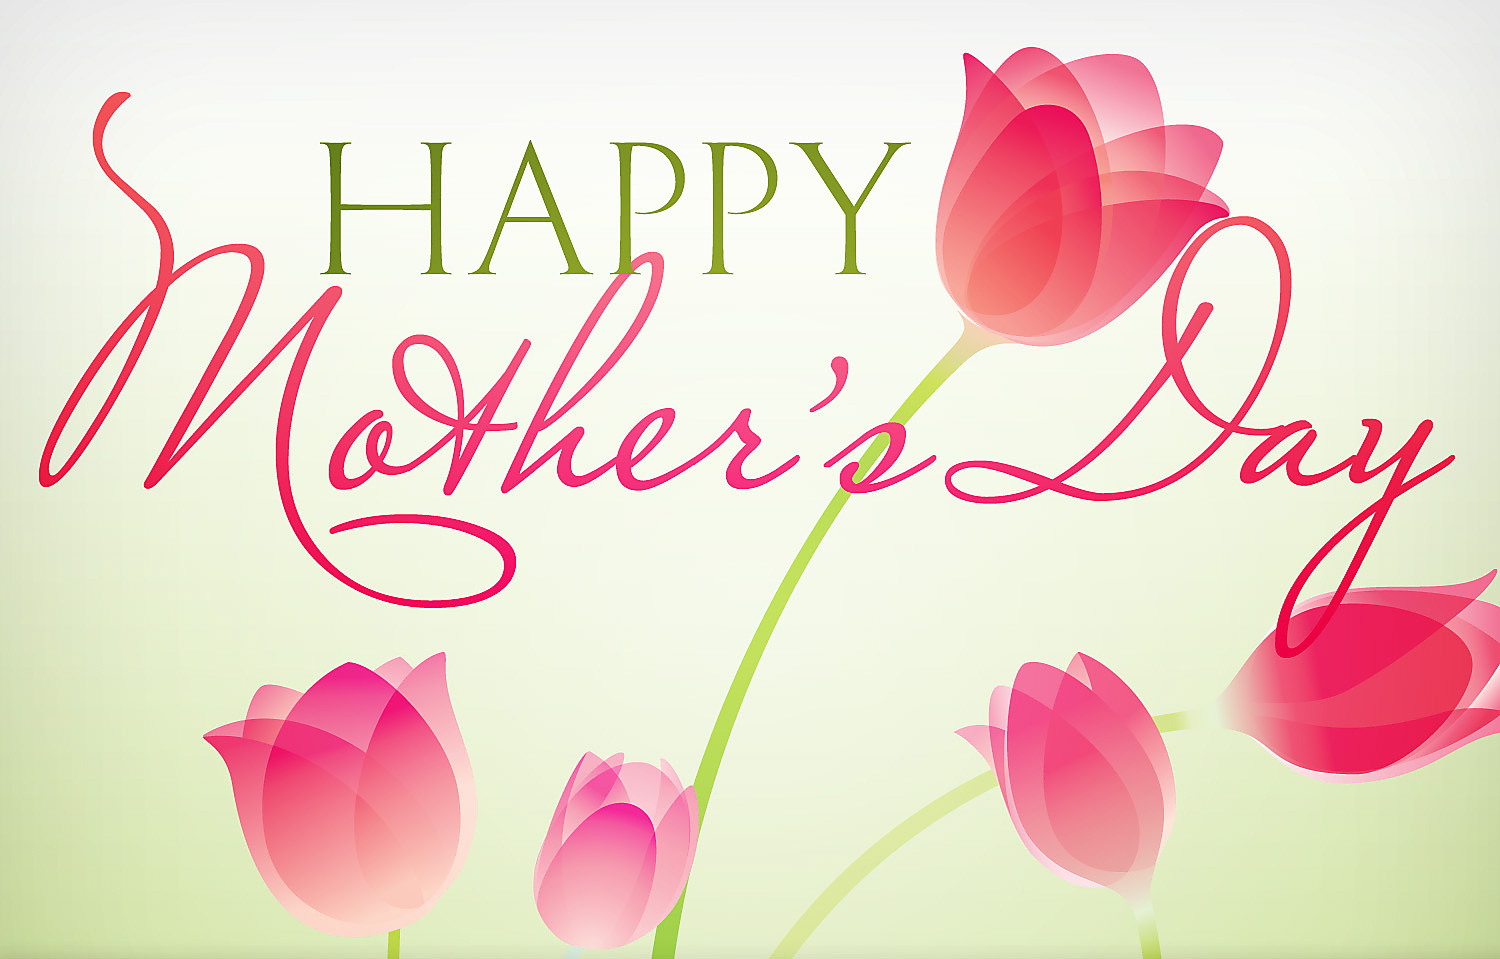 Happy Mothers Day Wallpaper On Rediff S